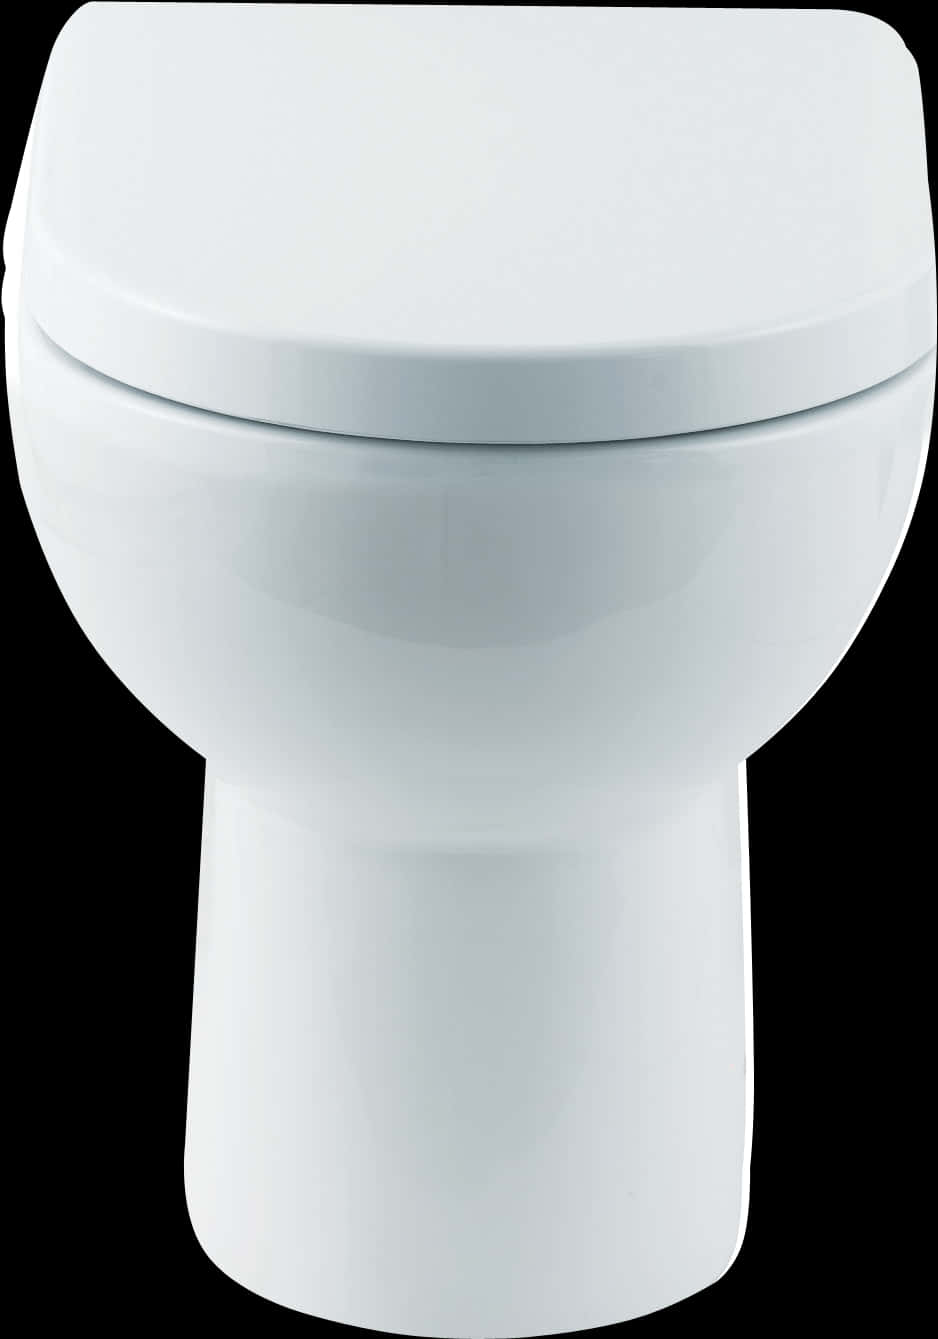 A White Toilet With A Seat